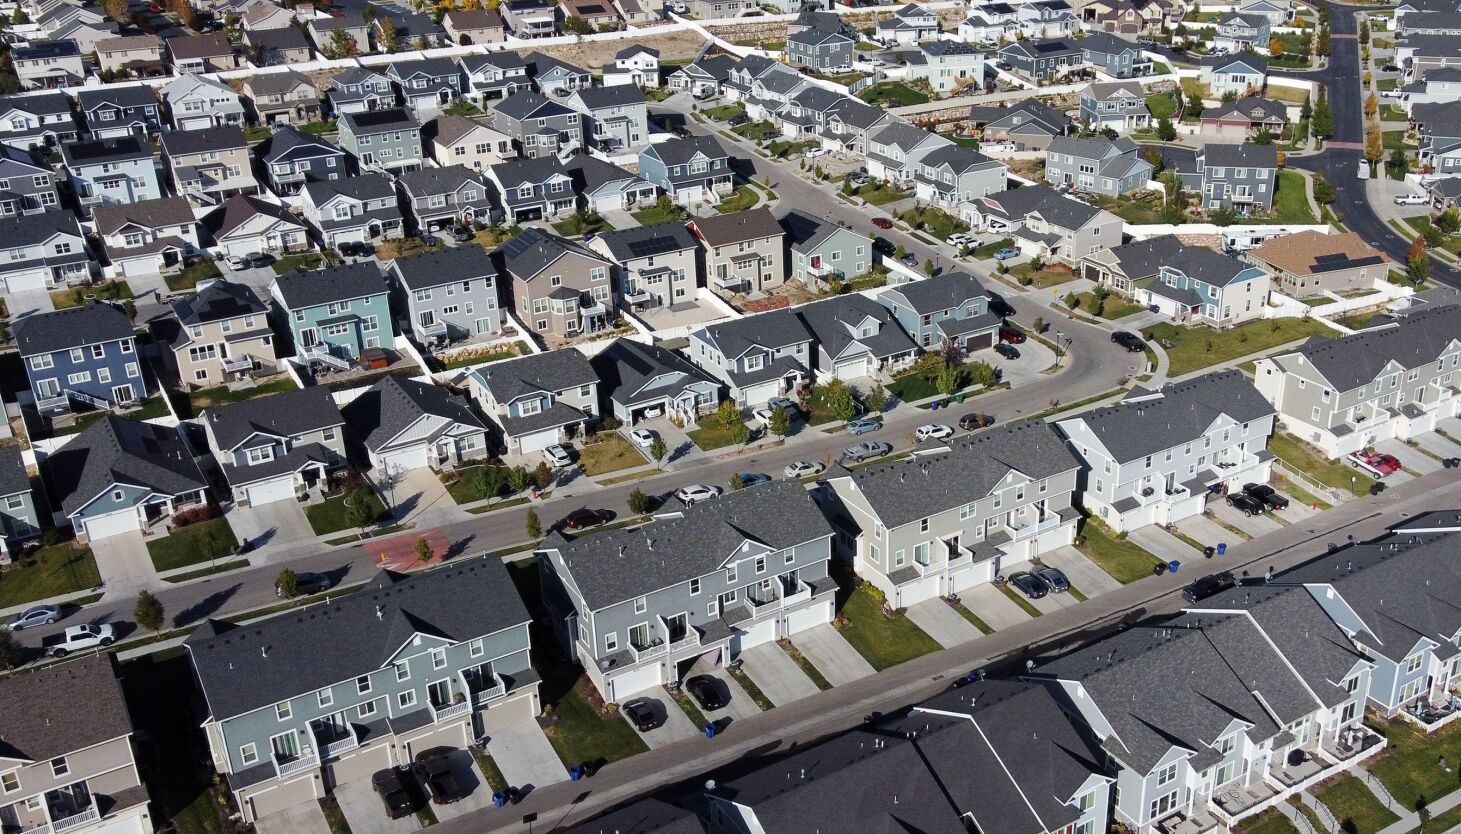 a decrease in US housing prices